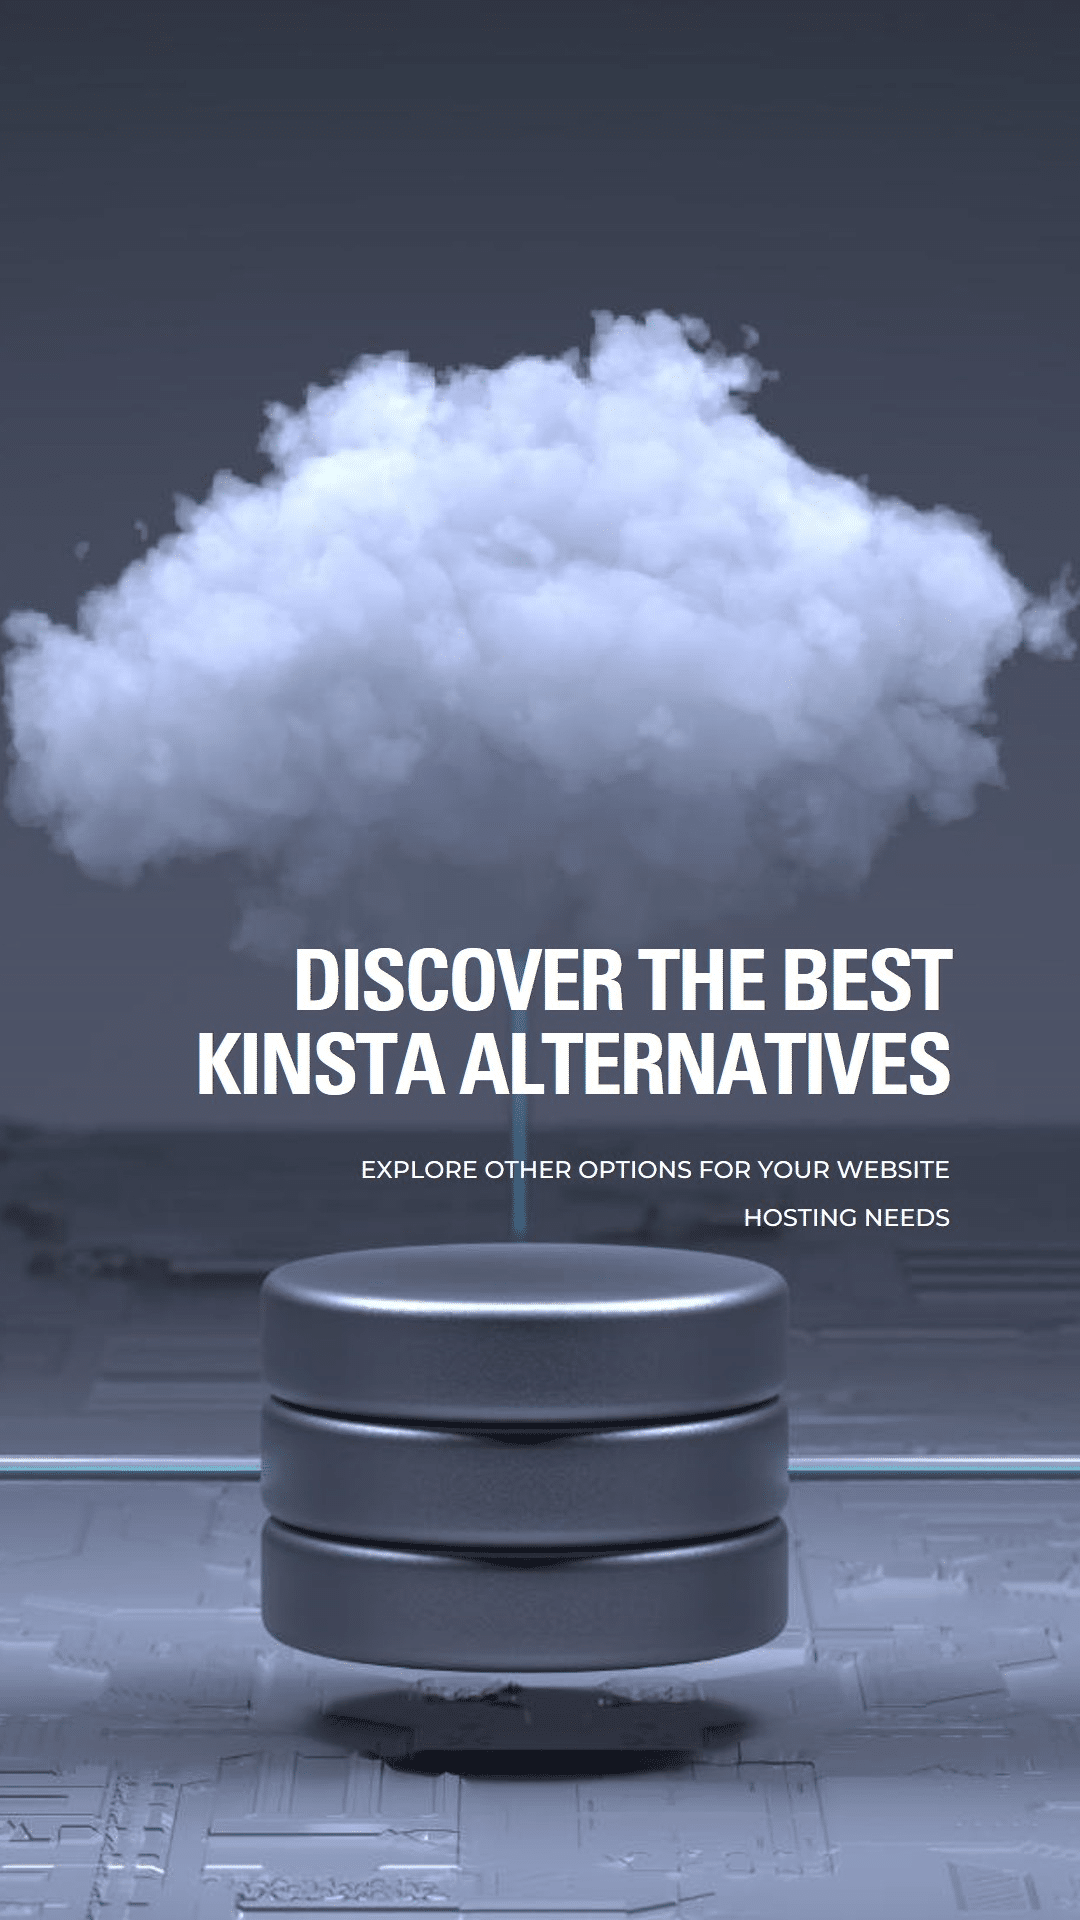 Why Look for an Alternative to Kinsta